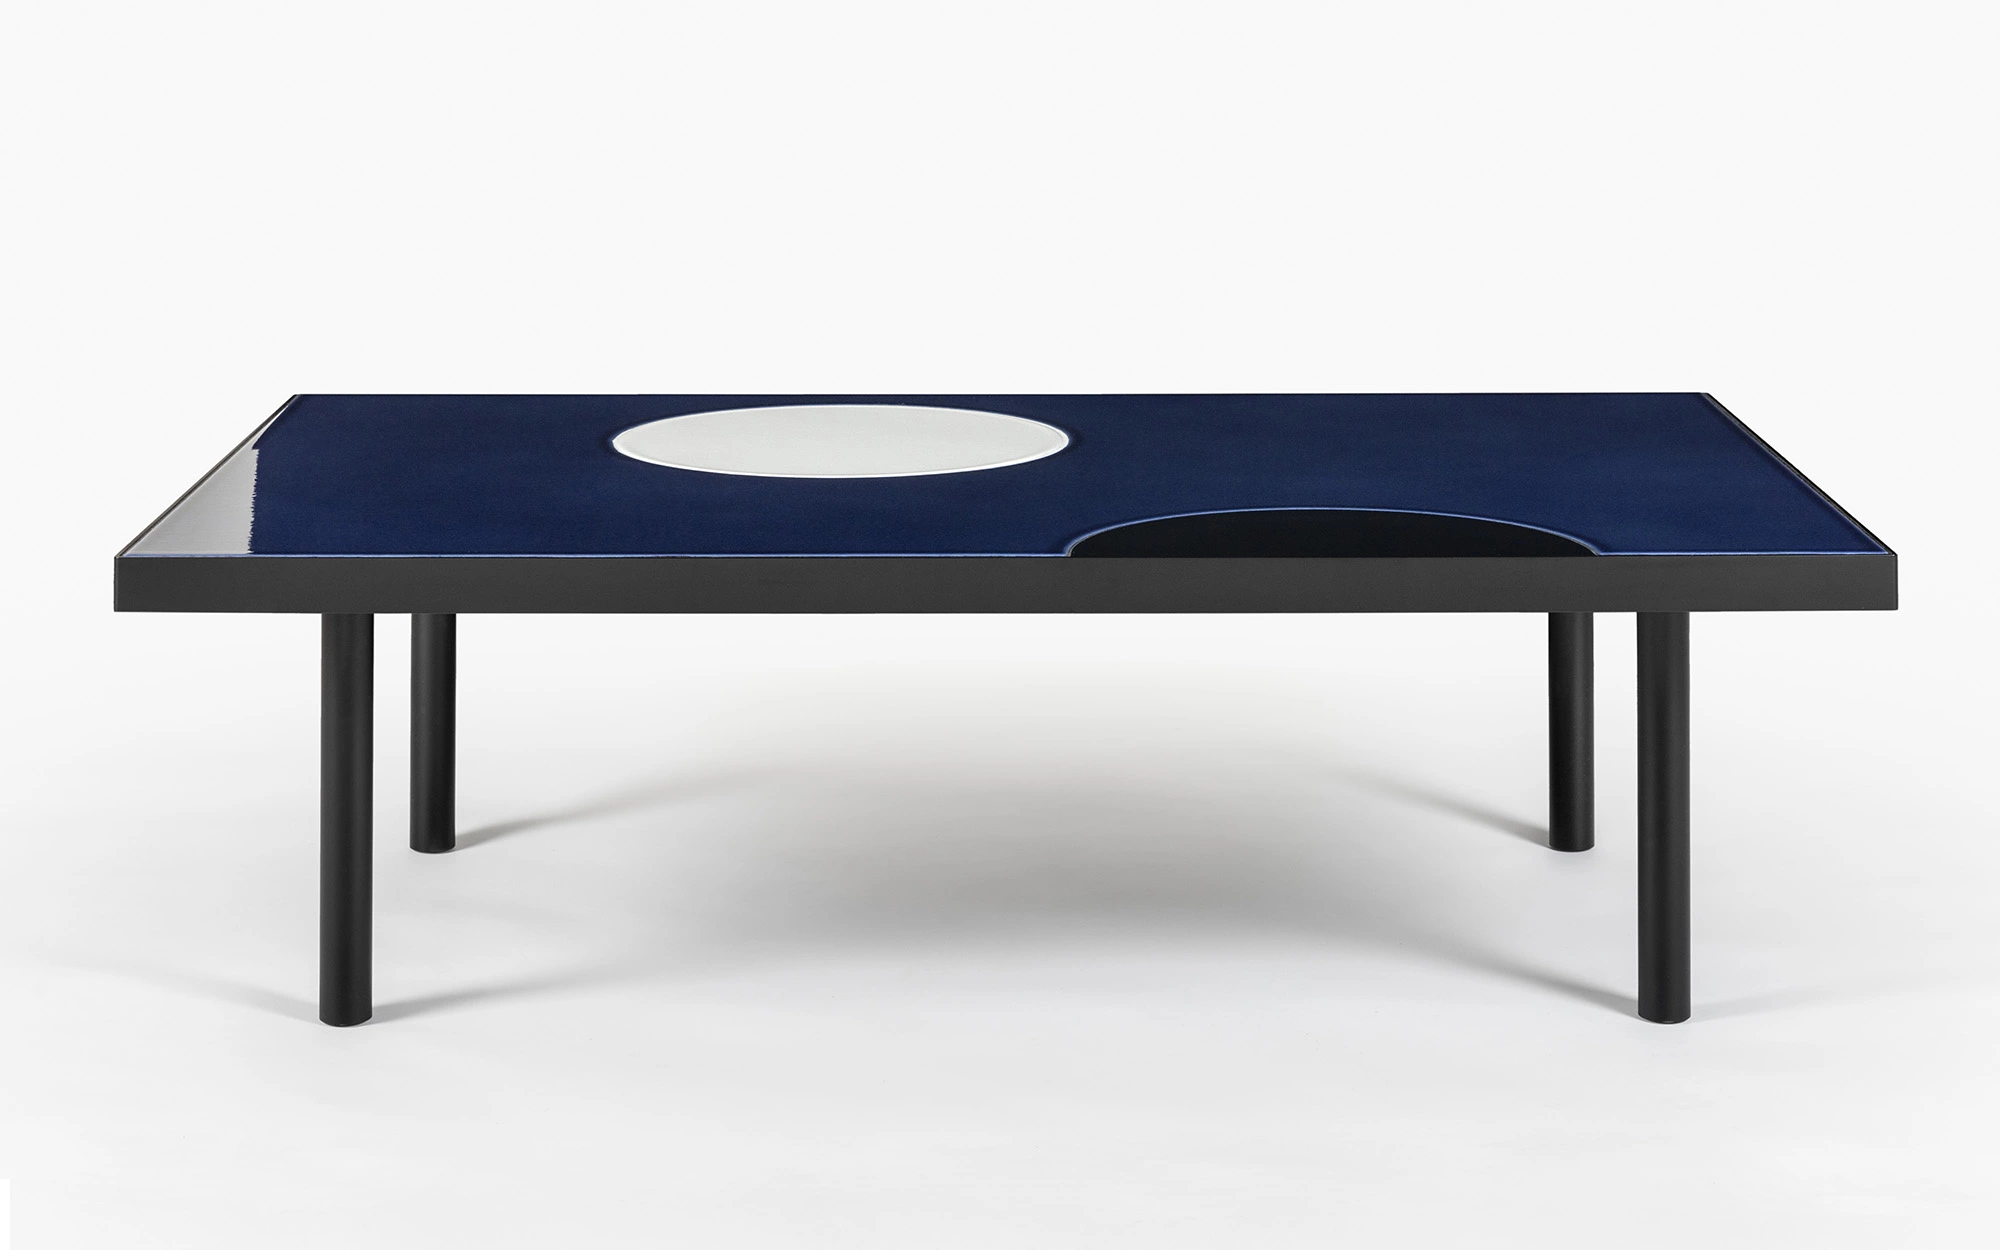 Translation Discolo Coffee Table - Pierre Charpin - coffee-table - Galerie kreo